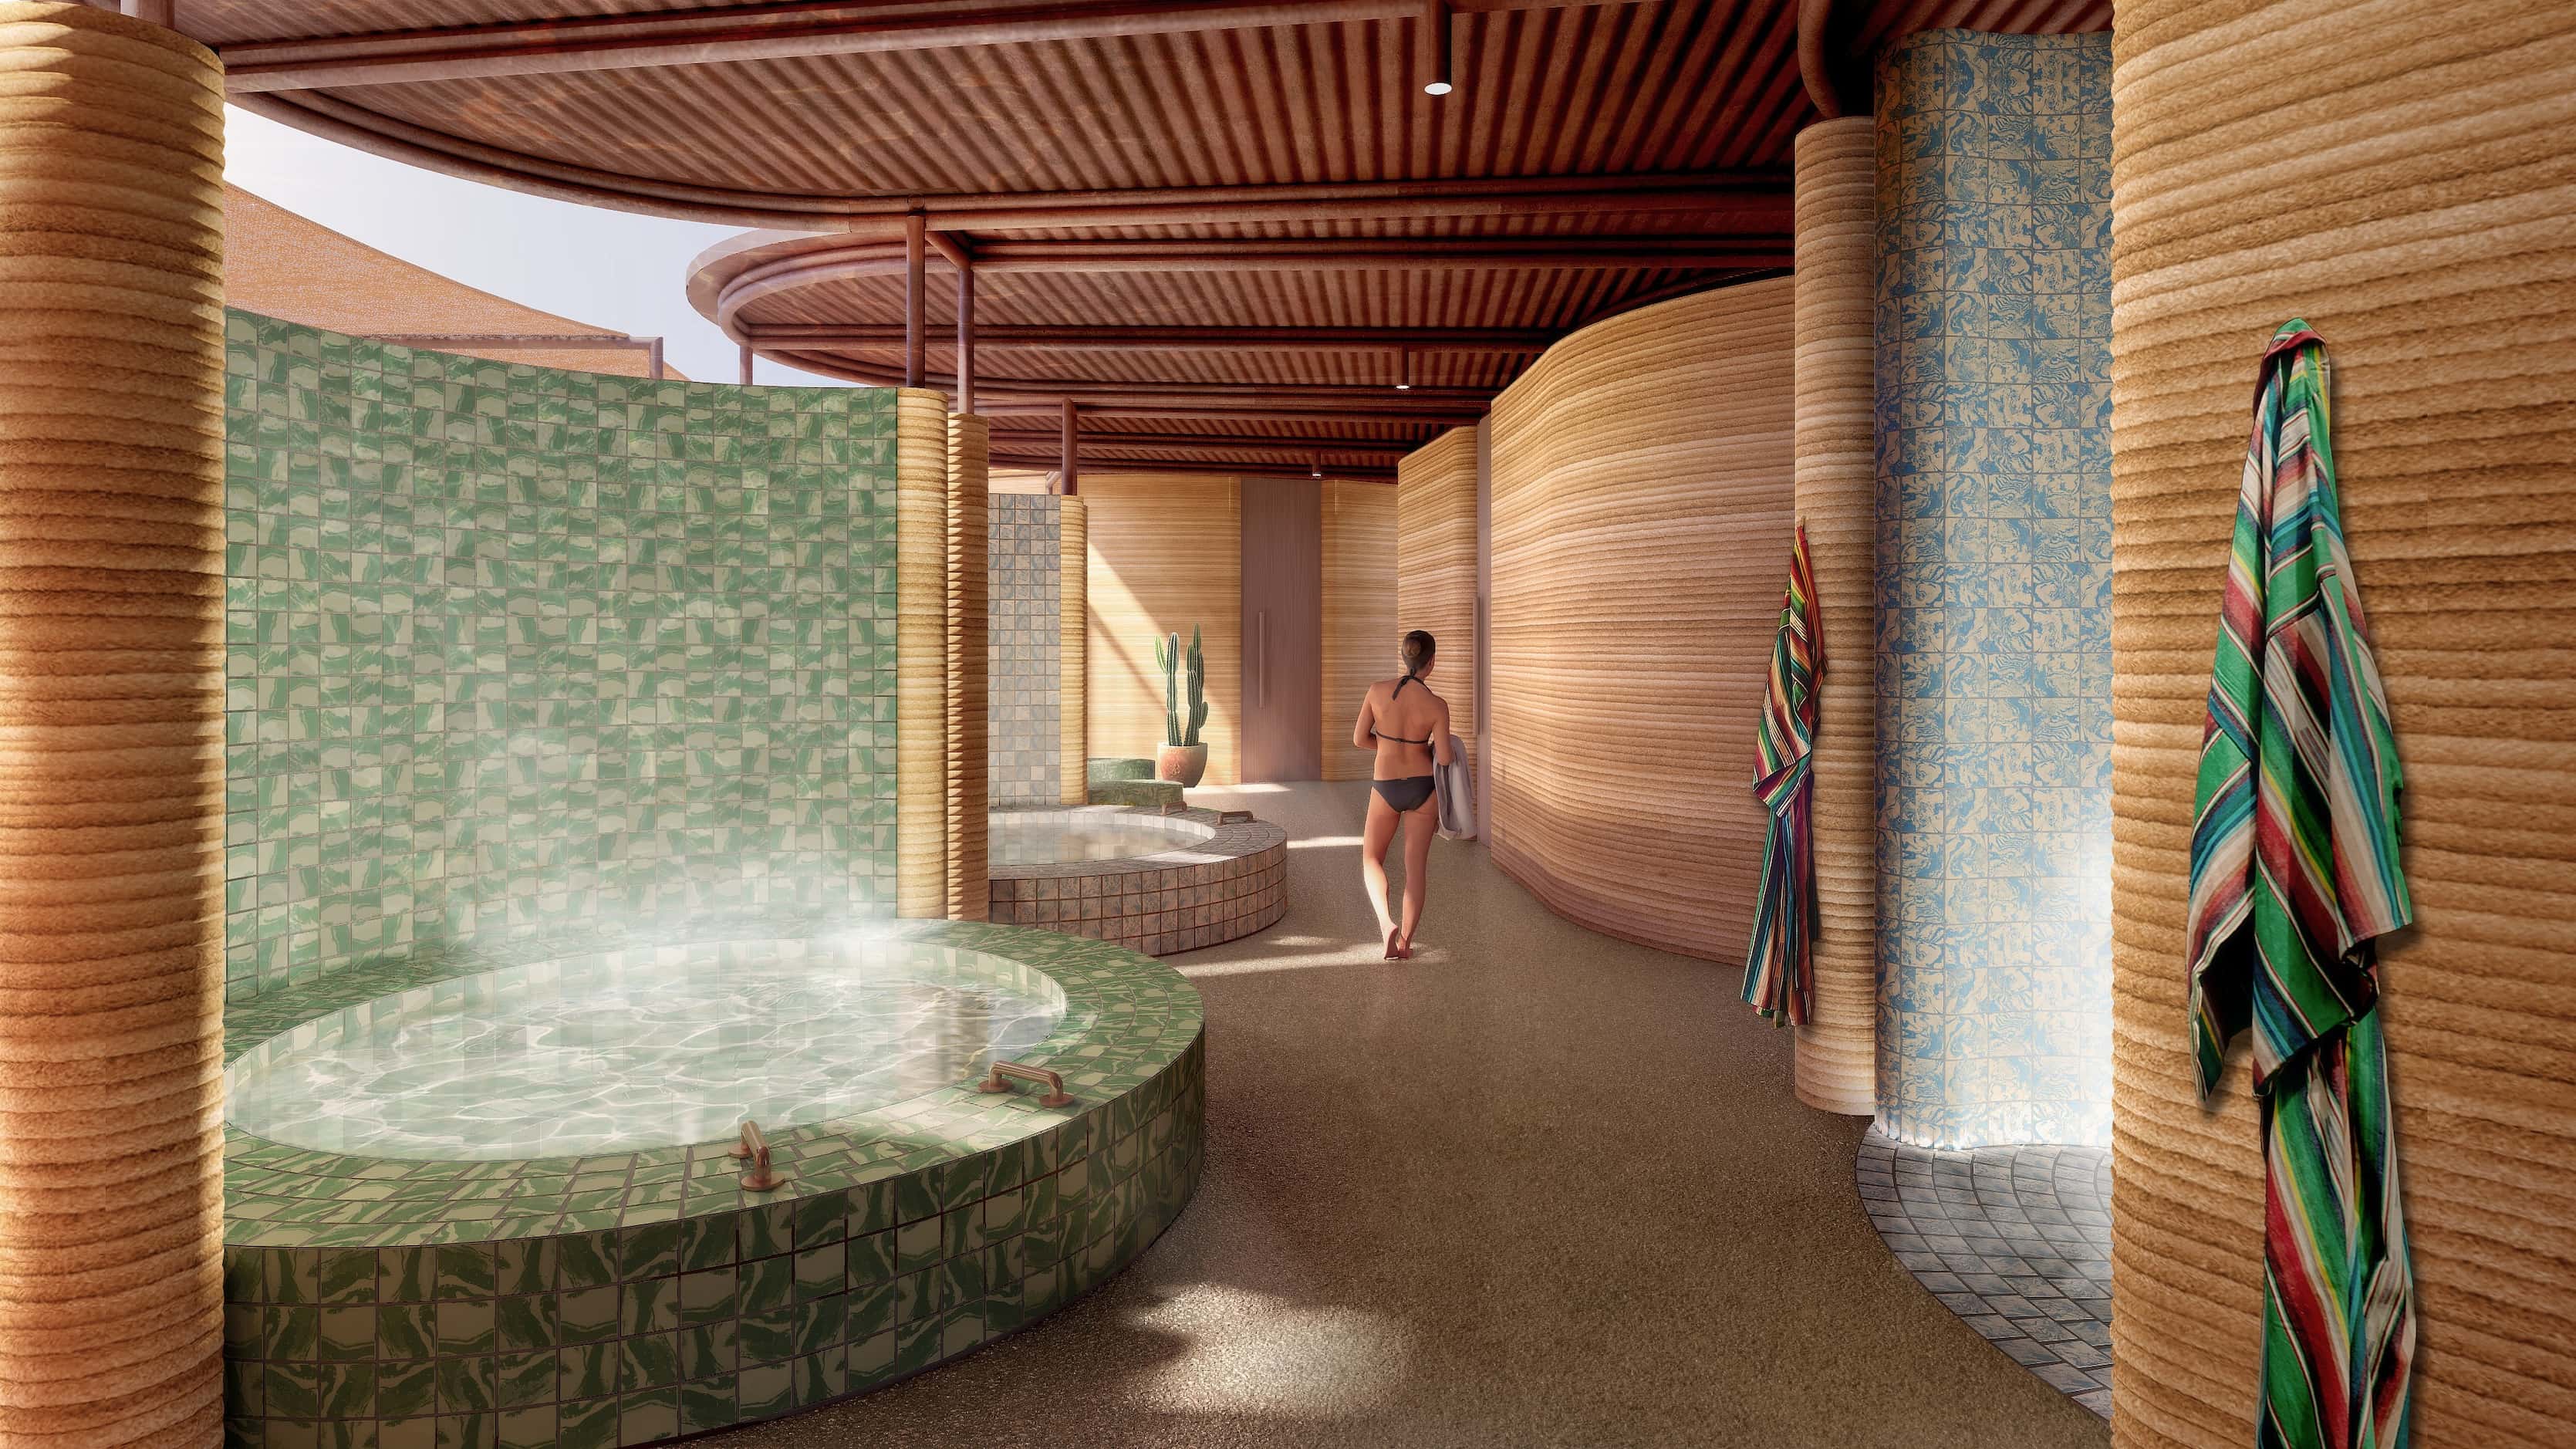 Here's a look at the bathhouse, which will be a key amenity among the new El Cosmico.